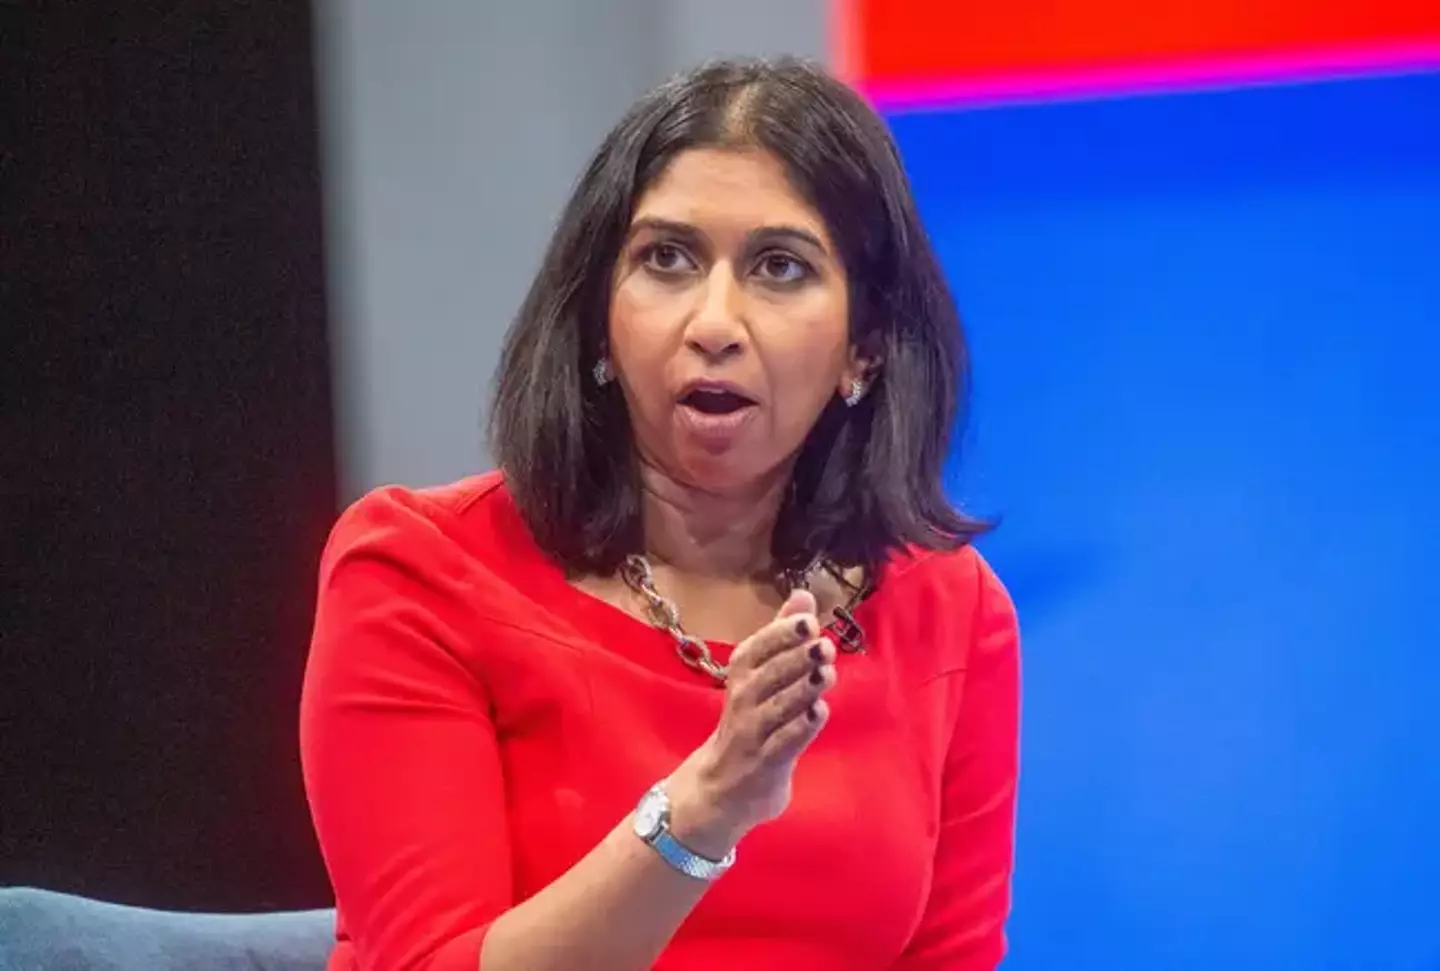 Home Secretary Suella Braverman is considering upgrading cannabis from a class B to a class A drug.